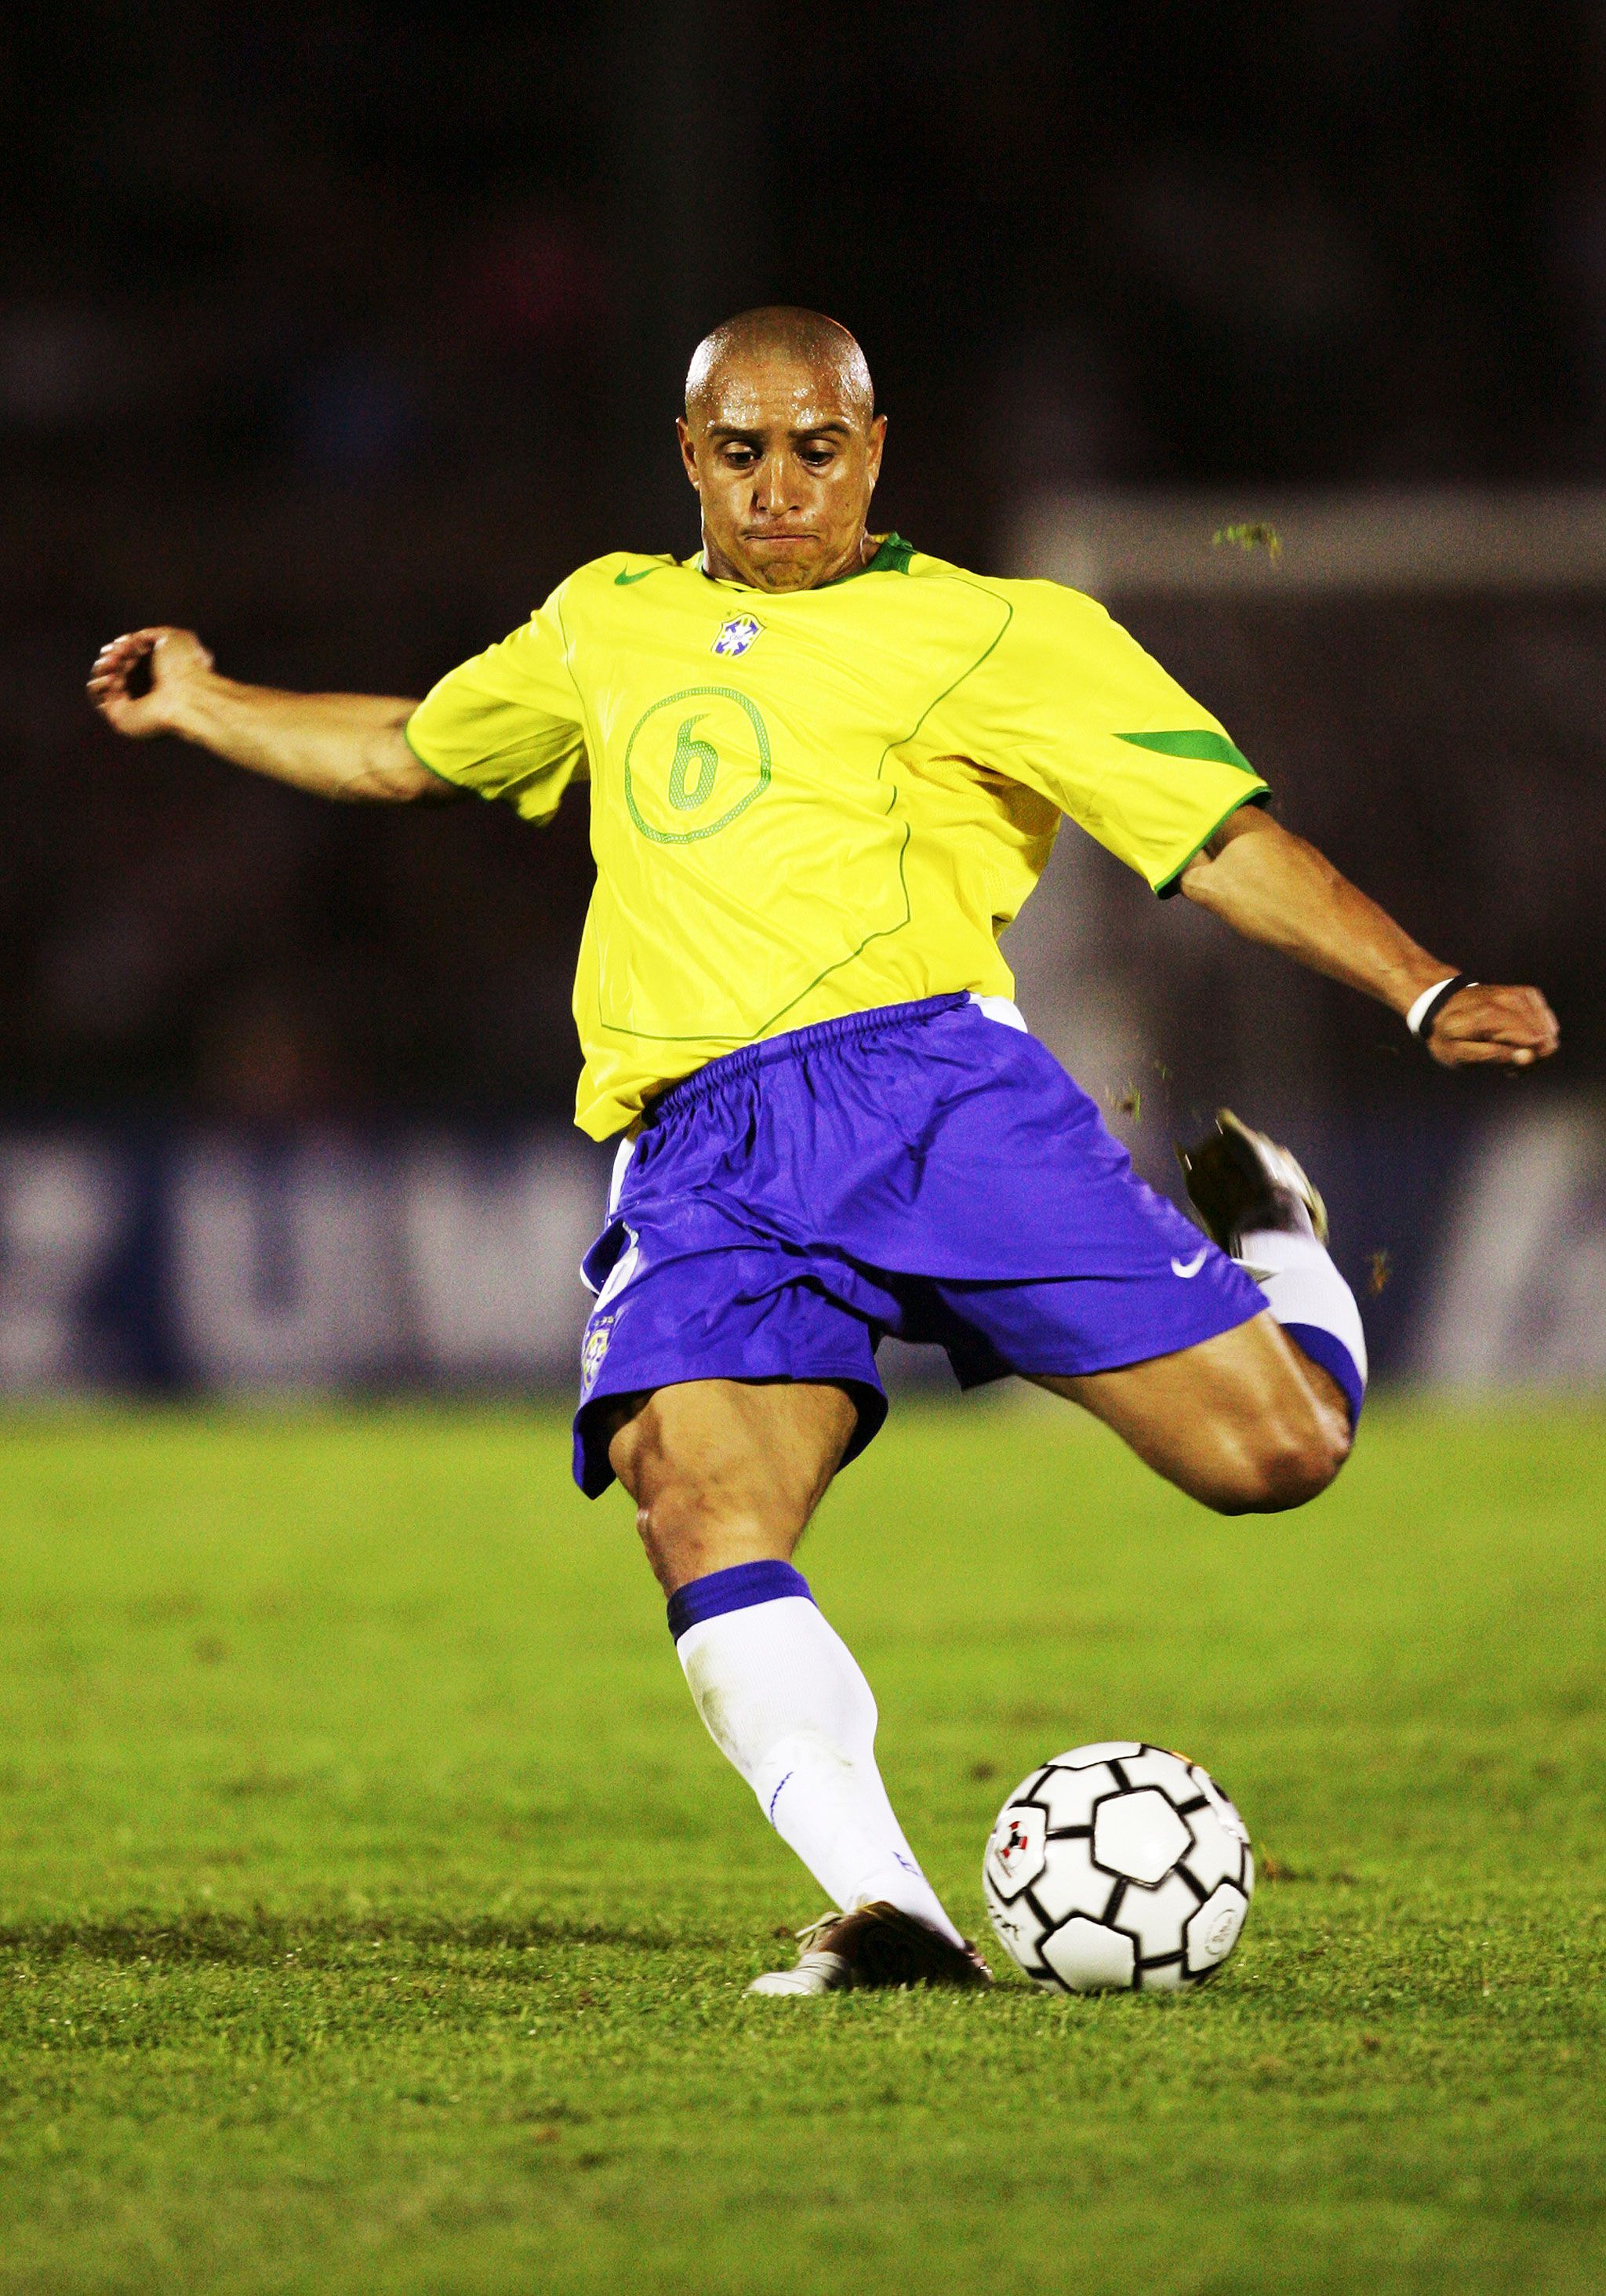 Leonidas Brazillian Players of All Time